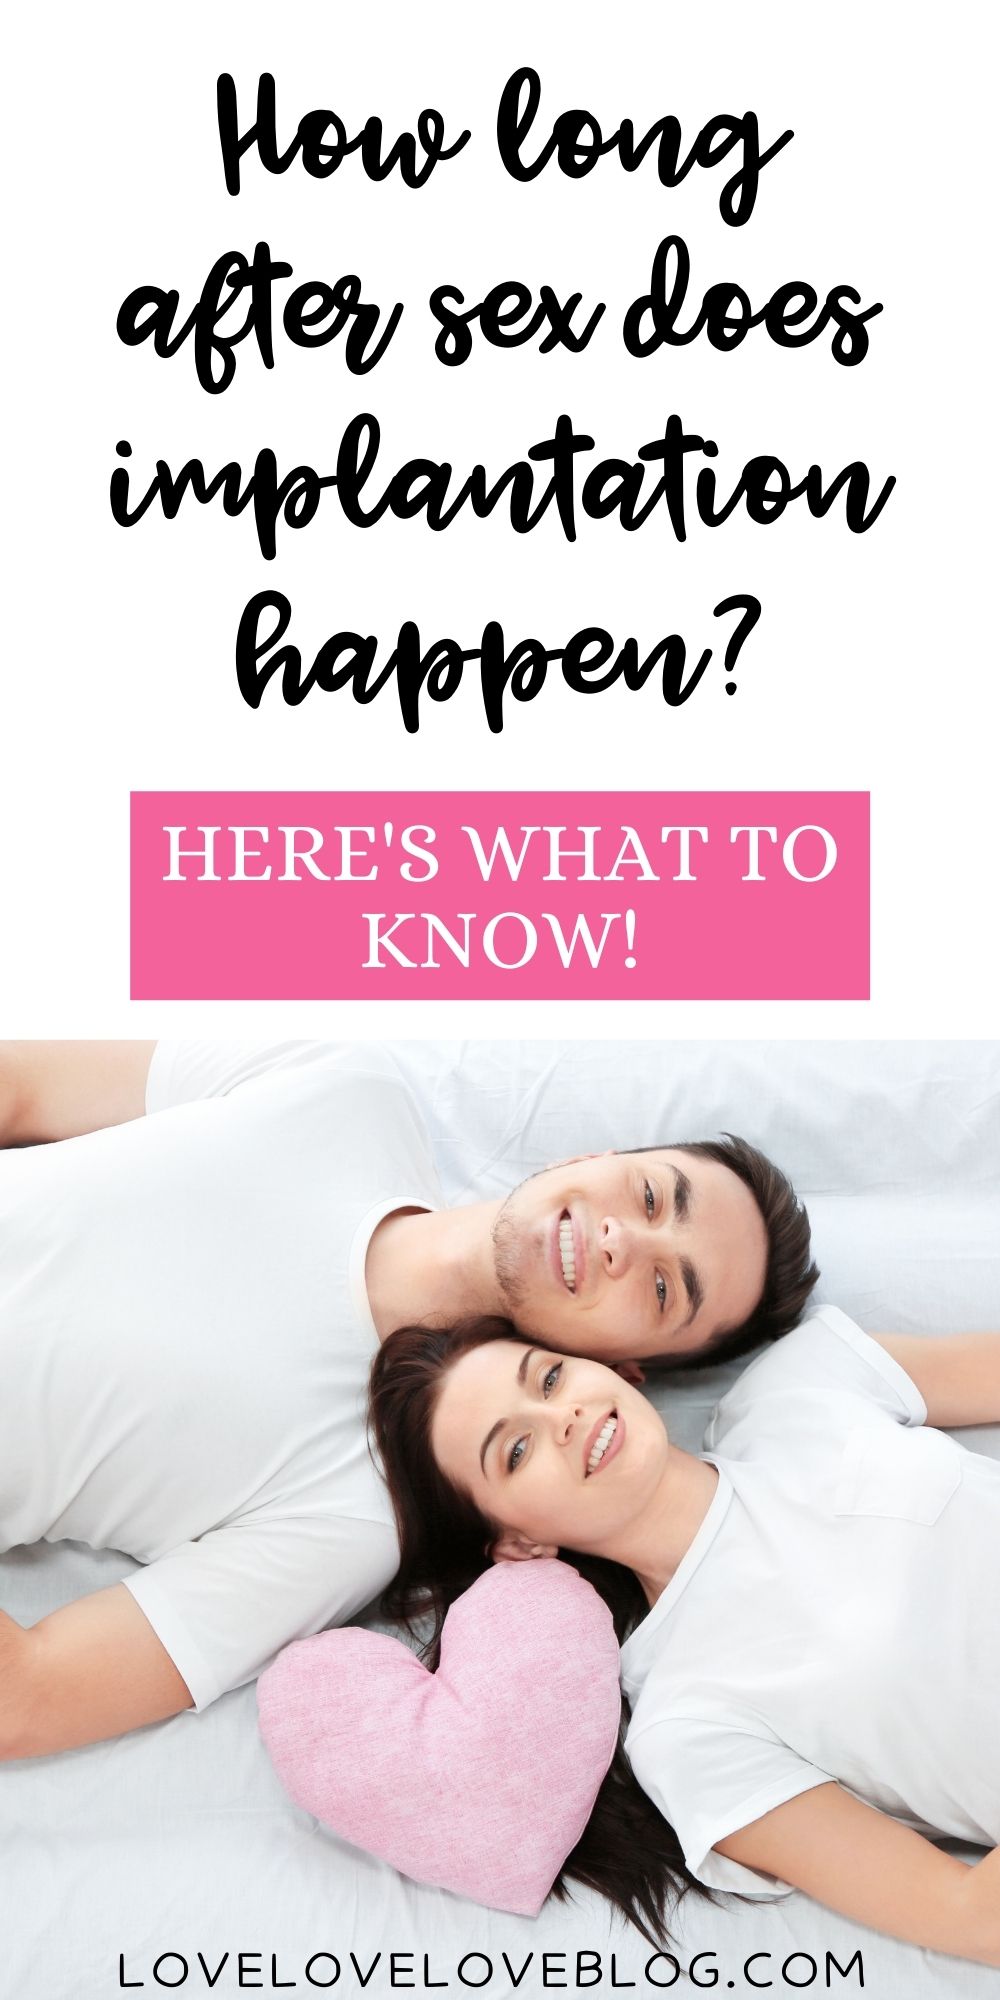 Pinterest graphic with text for "how long after sex does implantation happen?" and couple on bed.